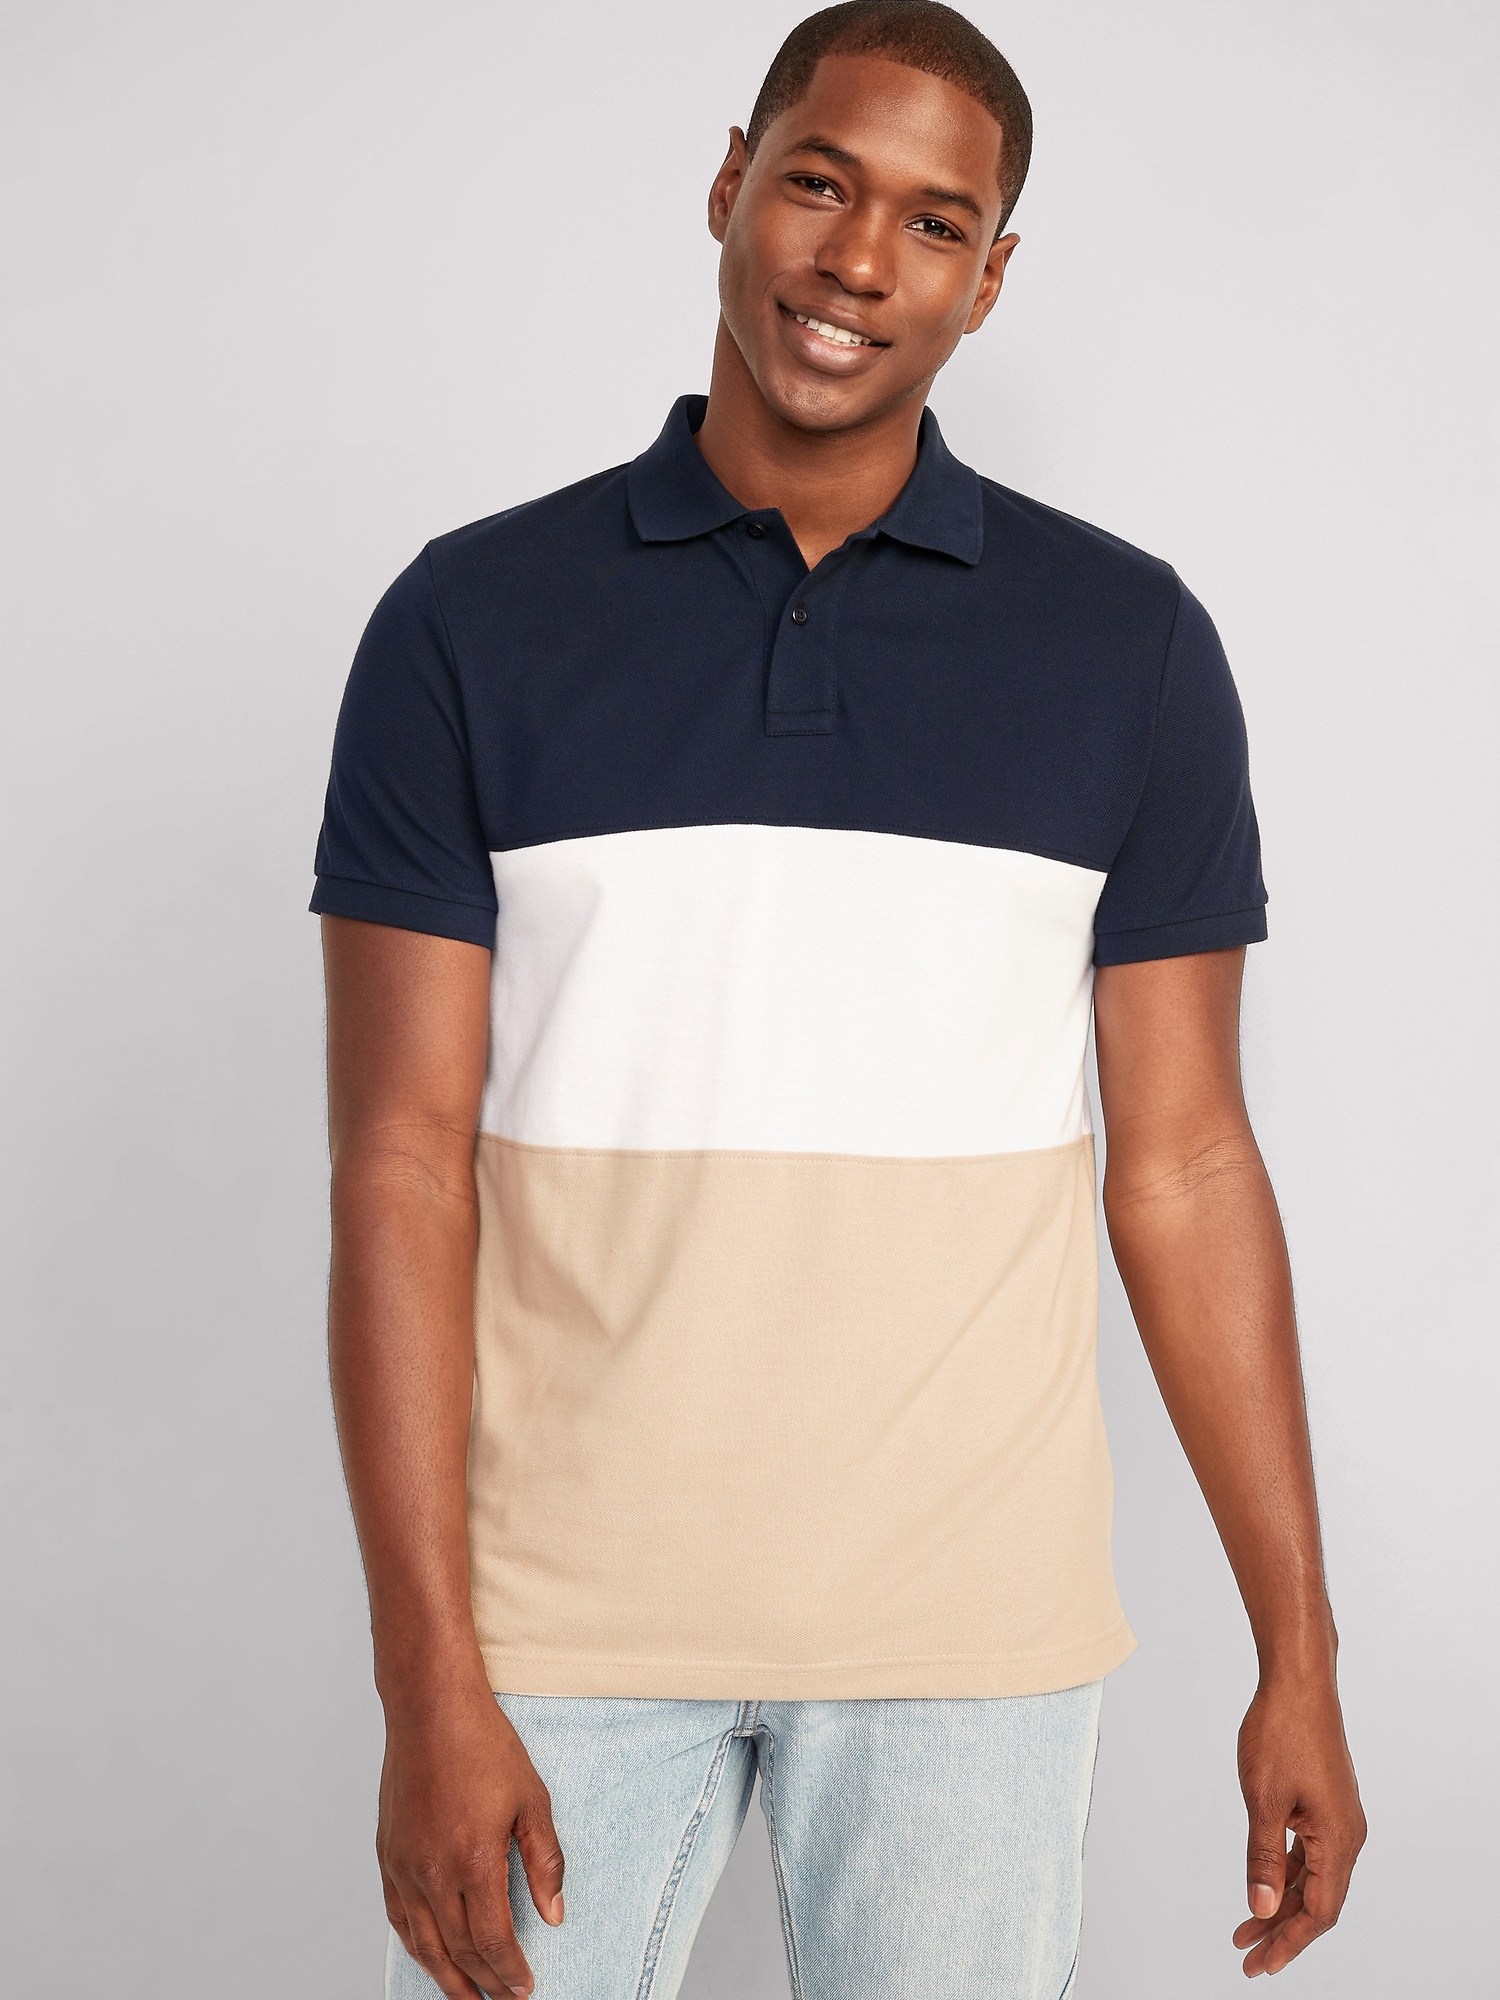 Old Navy Color-Block Classic Fit Pique Polo for Men blue. 1